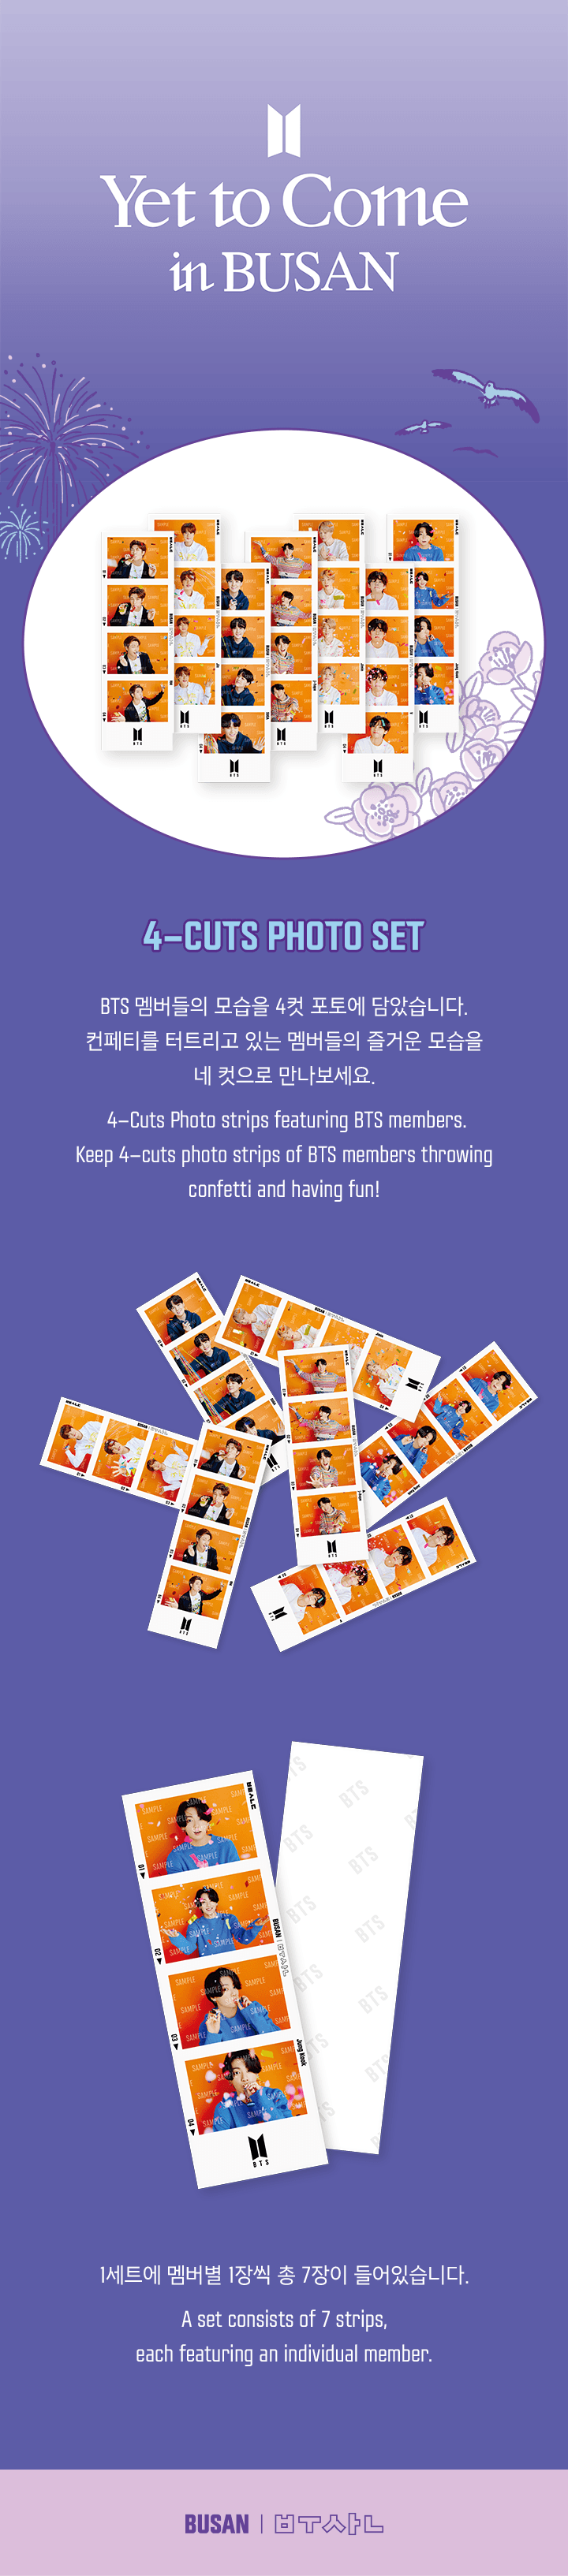 BTS [Yet To Come] 4-Cuts Photo Set